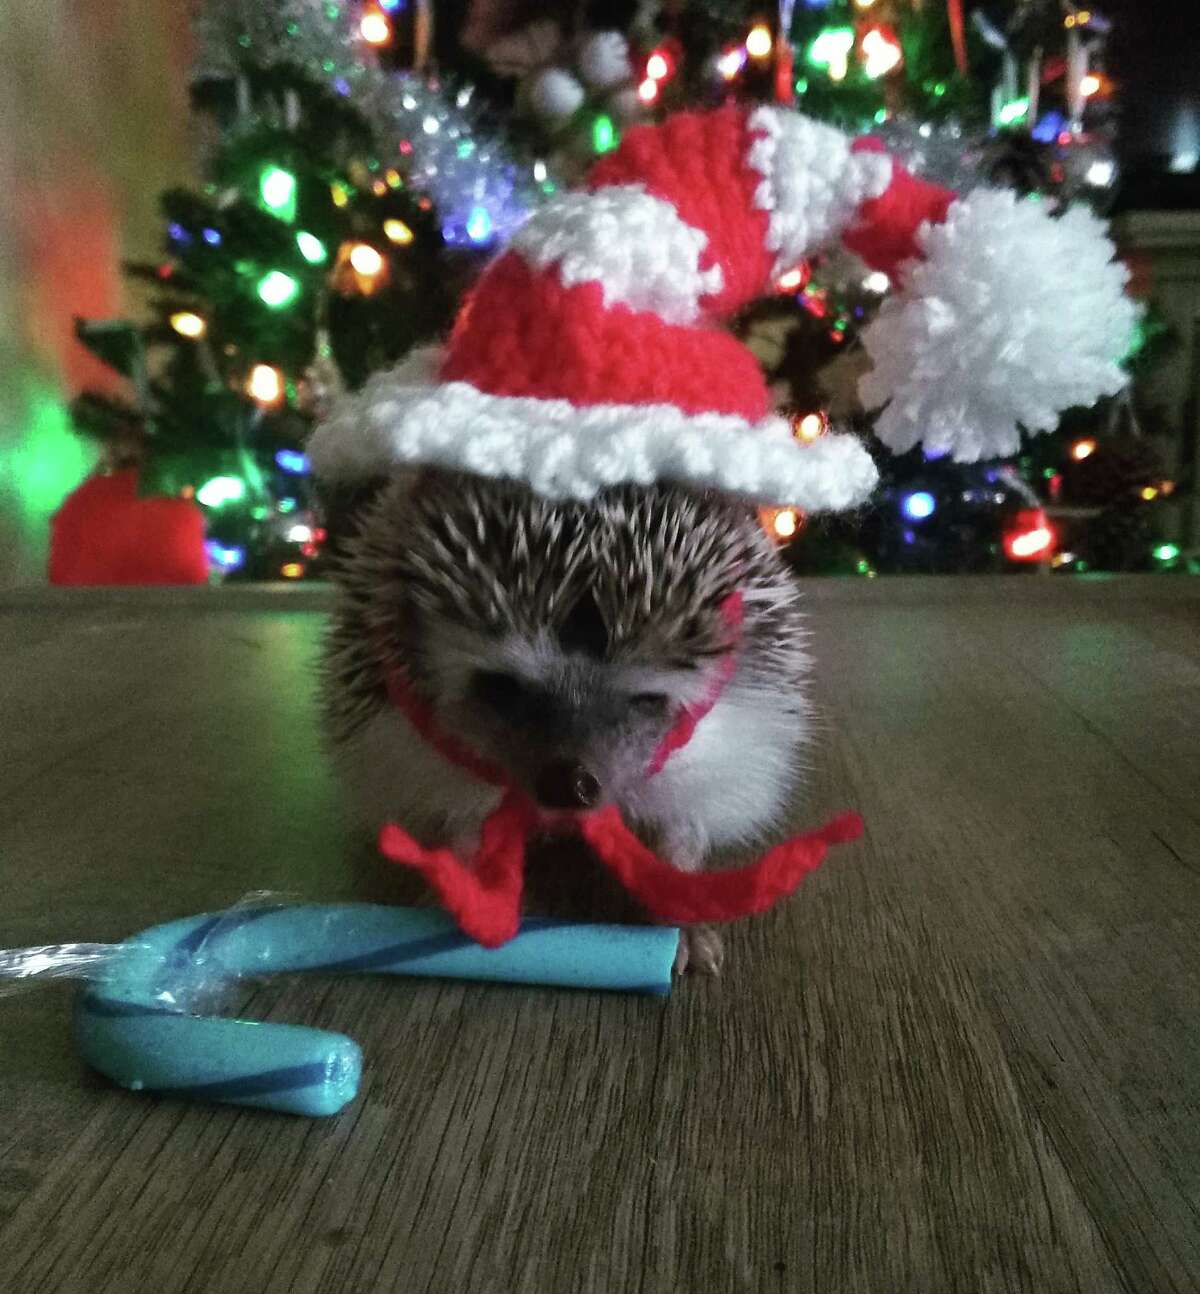 Wilbur the rescued hedgehog models a crocheted Christmas hat made by his owner, Melissa Schreiner.